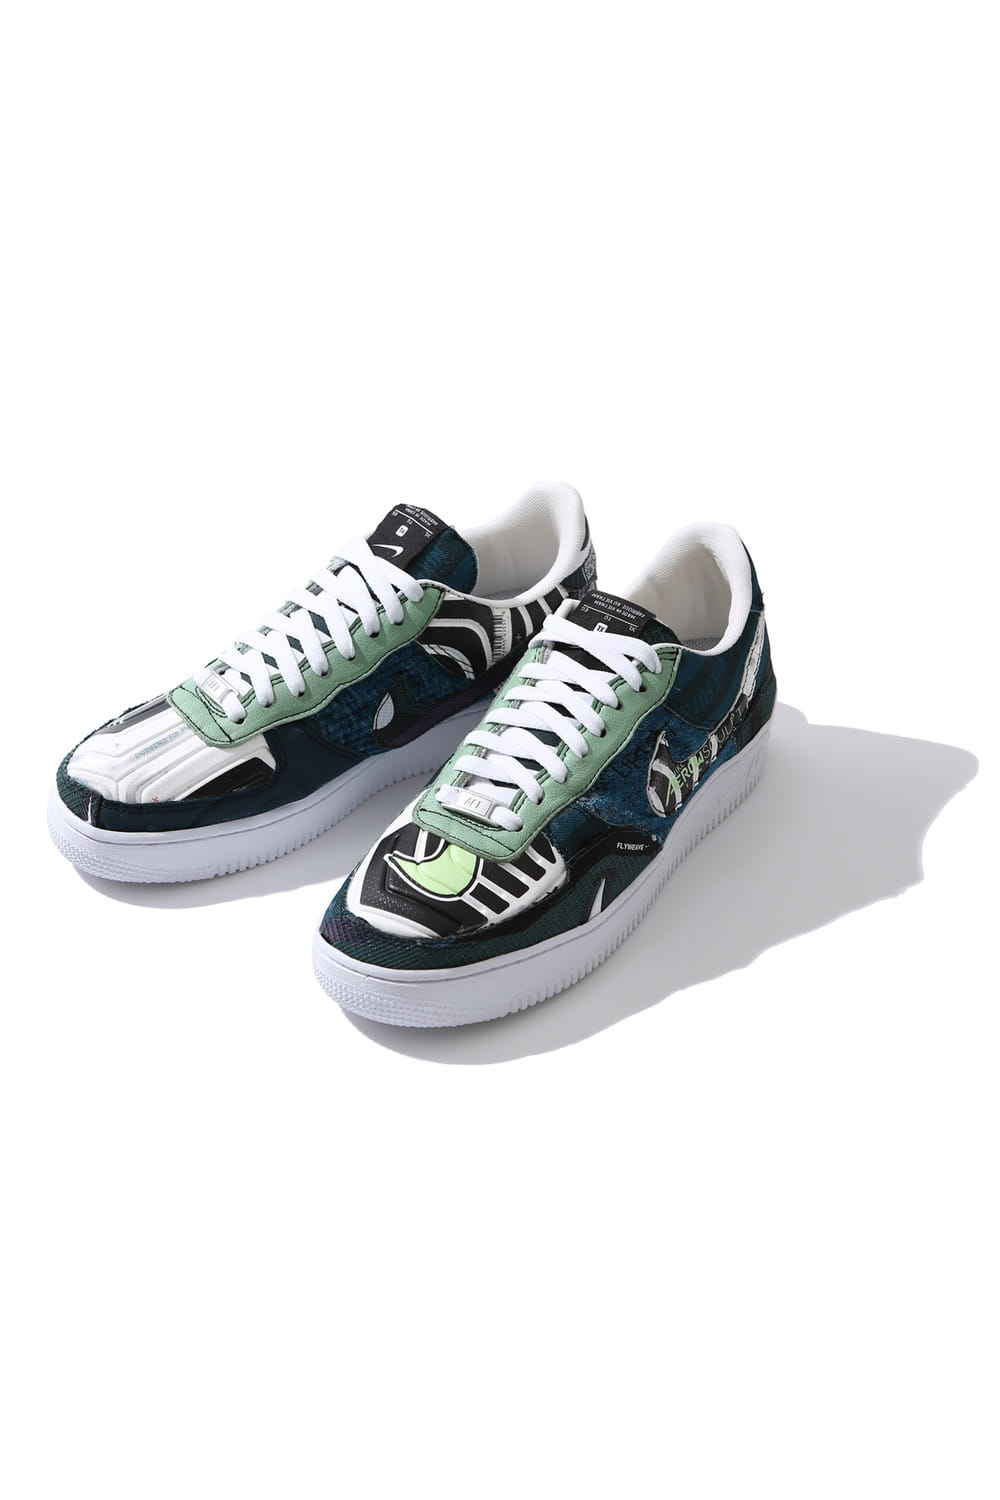 T.B.O.S X NIKE SEOUL collaboration shoes &quot;Air force-1&quot; 001